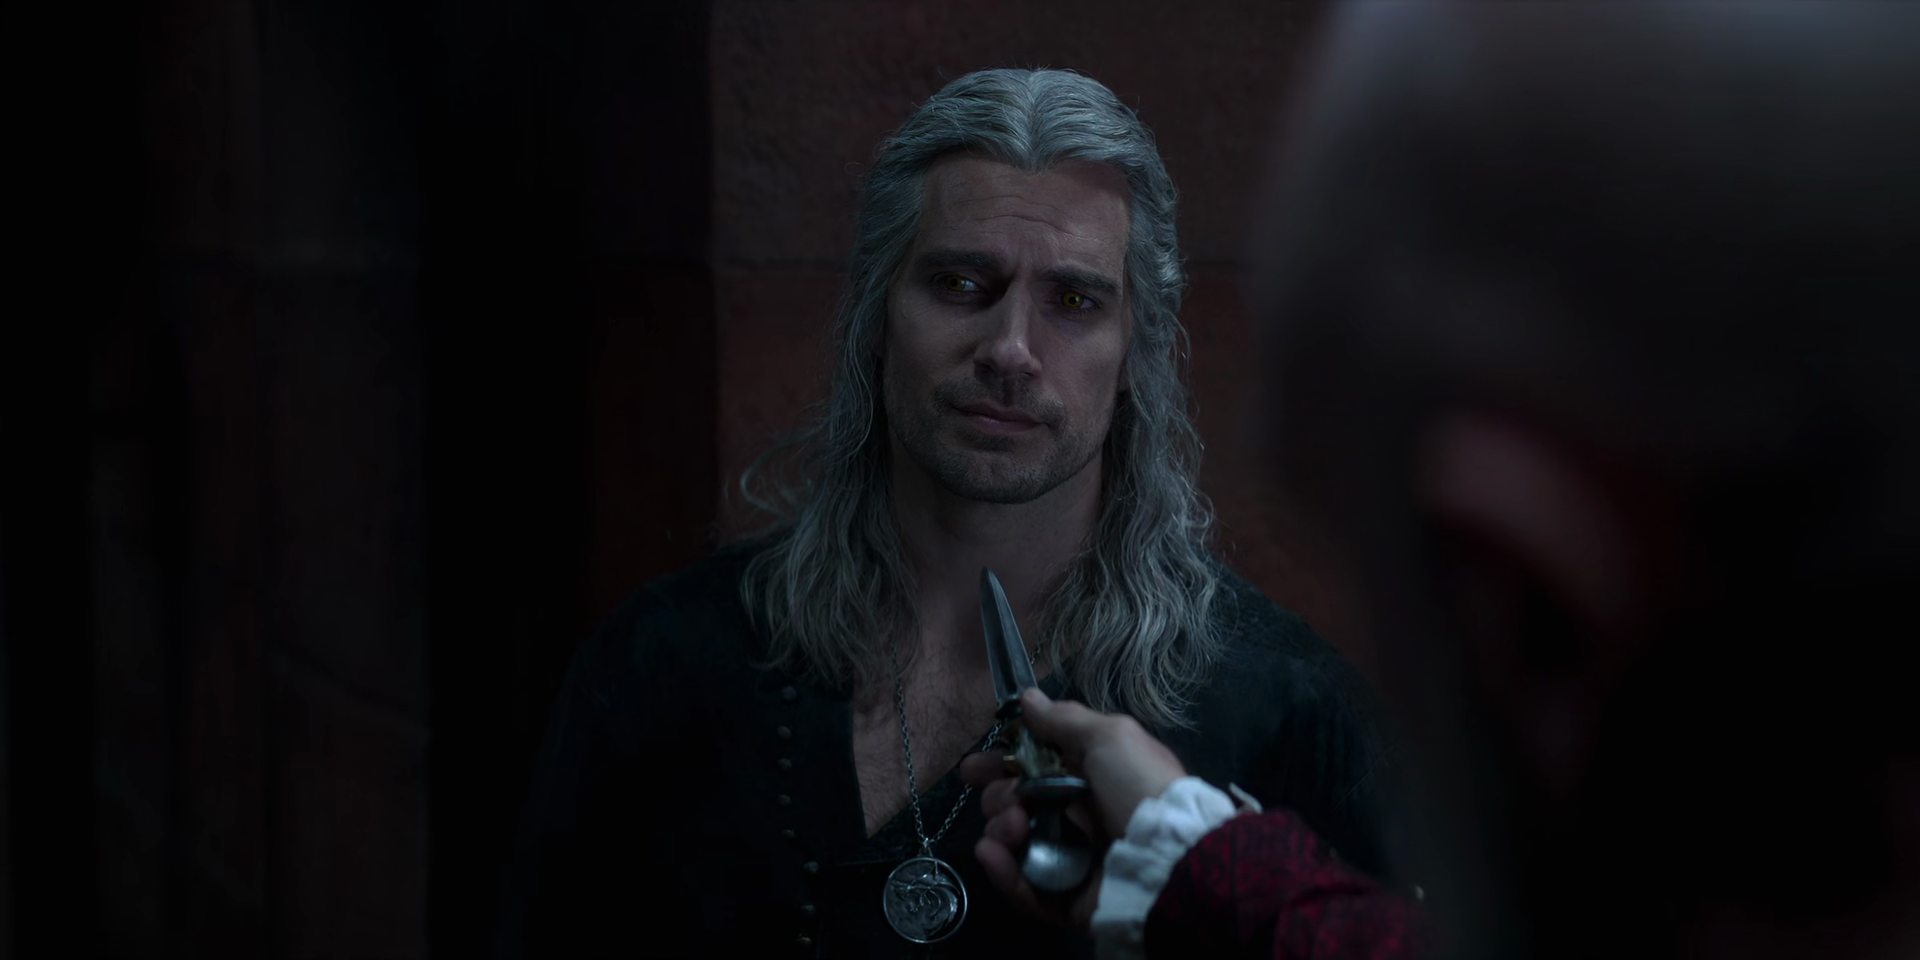 Geralt (Henry Cavill ) is interrogated by Djikstra (Graham McTavish) schemes in The Witcher Season 3 Episode 6 “Everybody Has a Plan ‘Til They Get Punched in the Face” (2023), Netflix